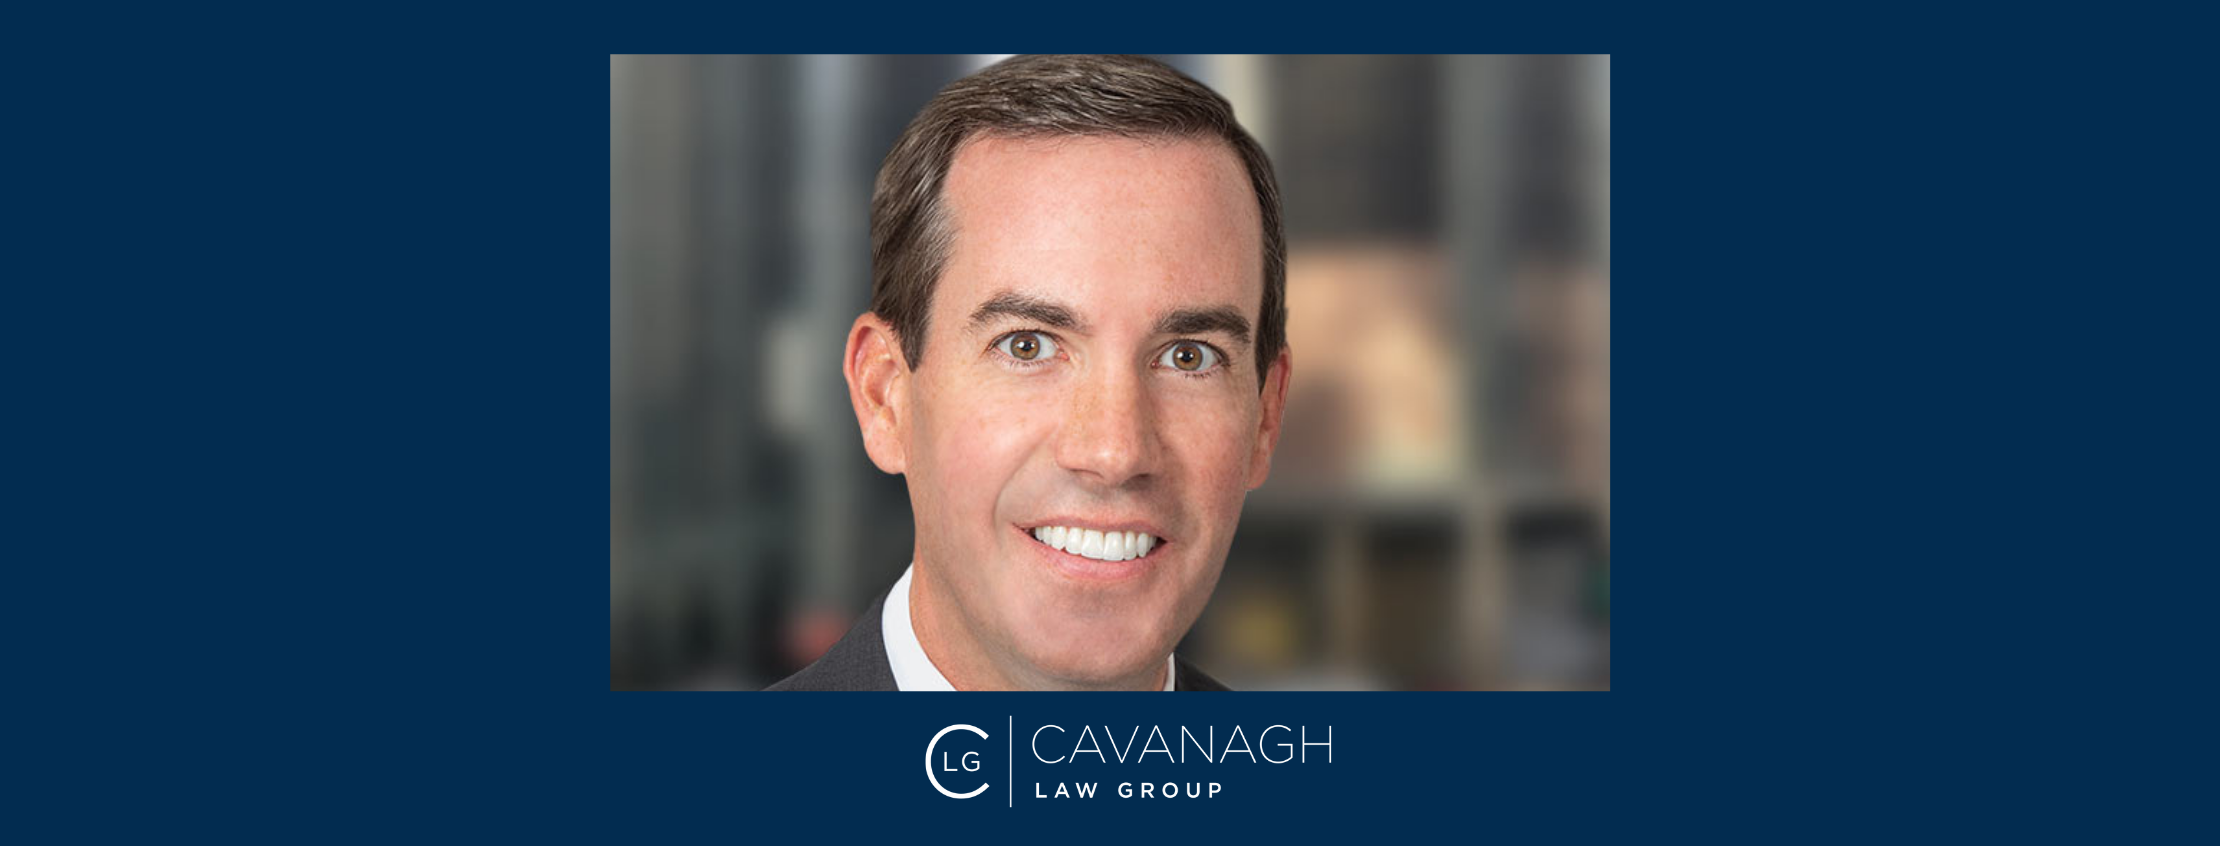 GET TO KNOW YOU: CAVANAGH LAW GROUP PARTNER MICHAEL SORICH TALKS TRUCKING, CONSTRUCTION CASES